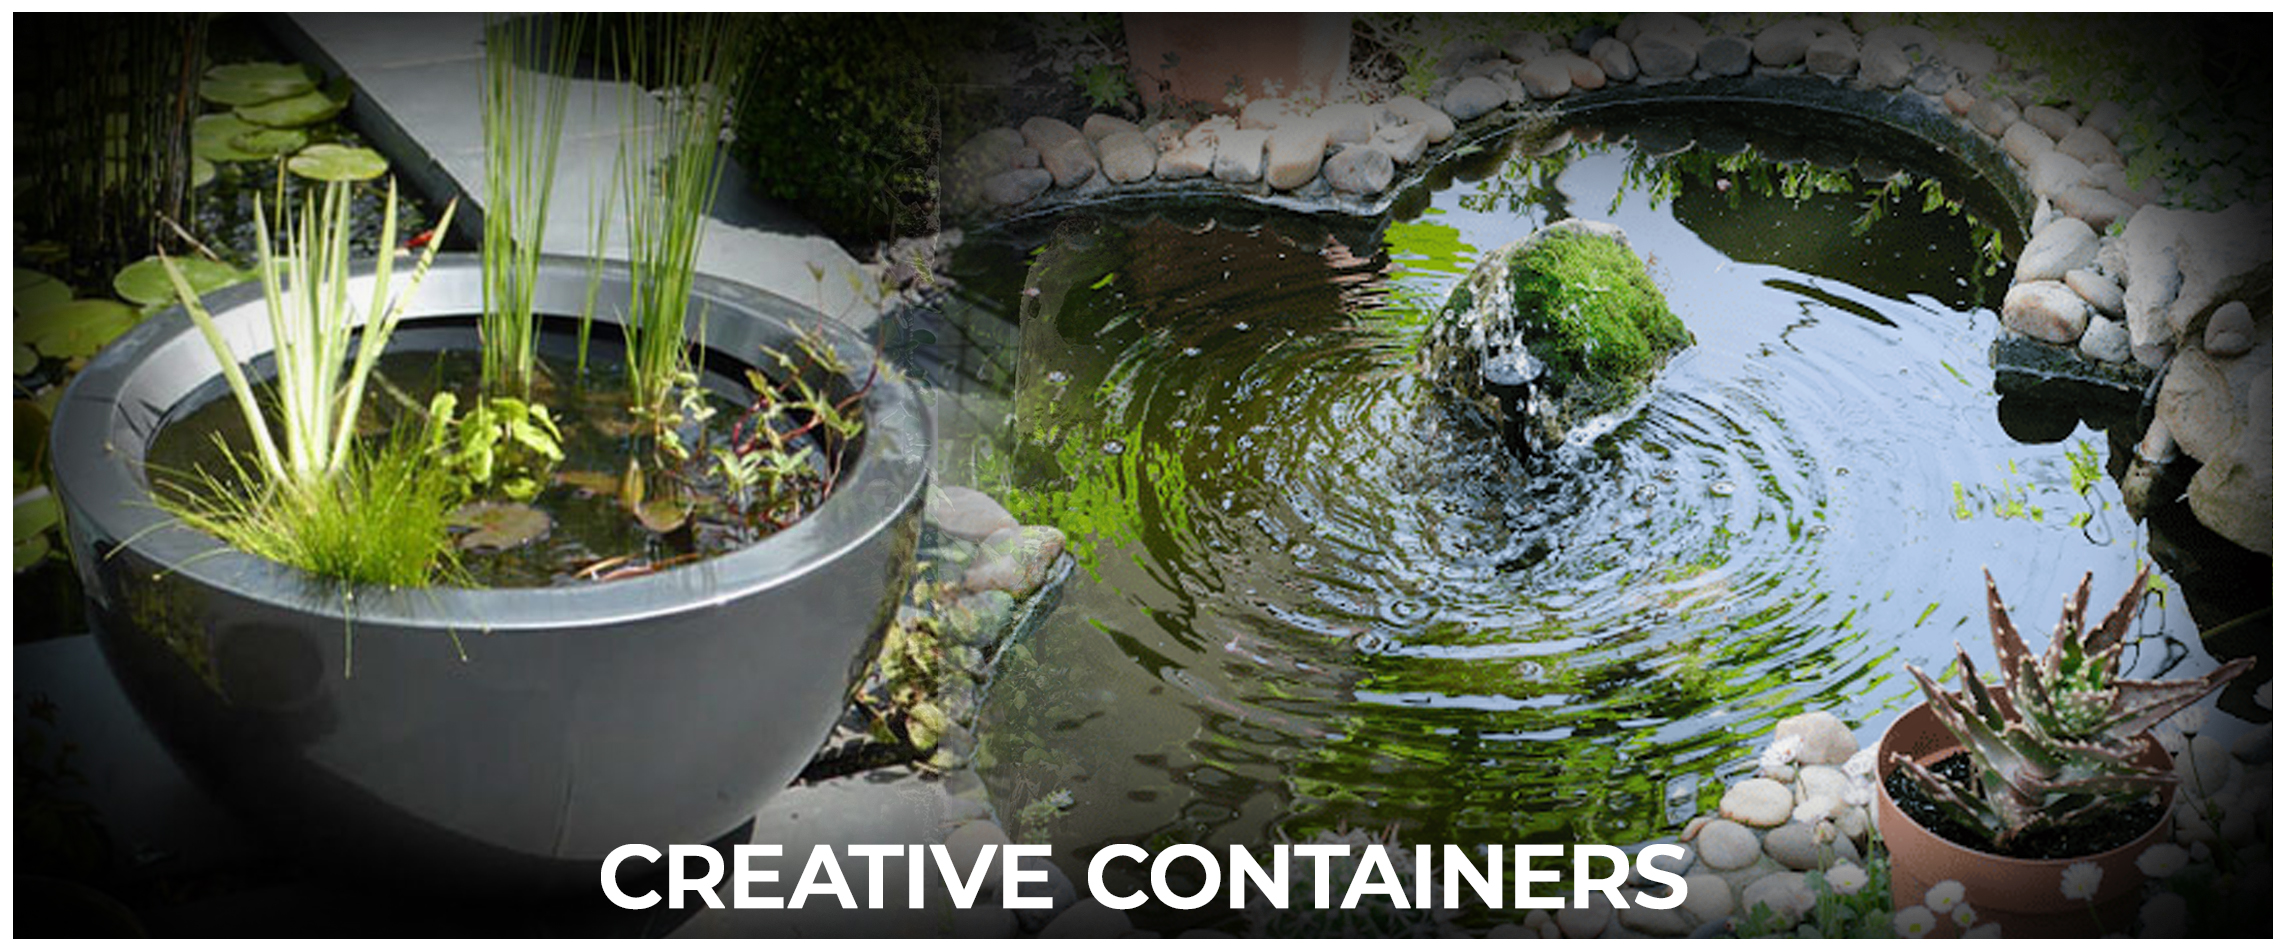  Creative Containers